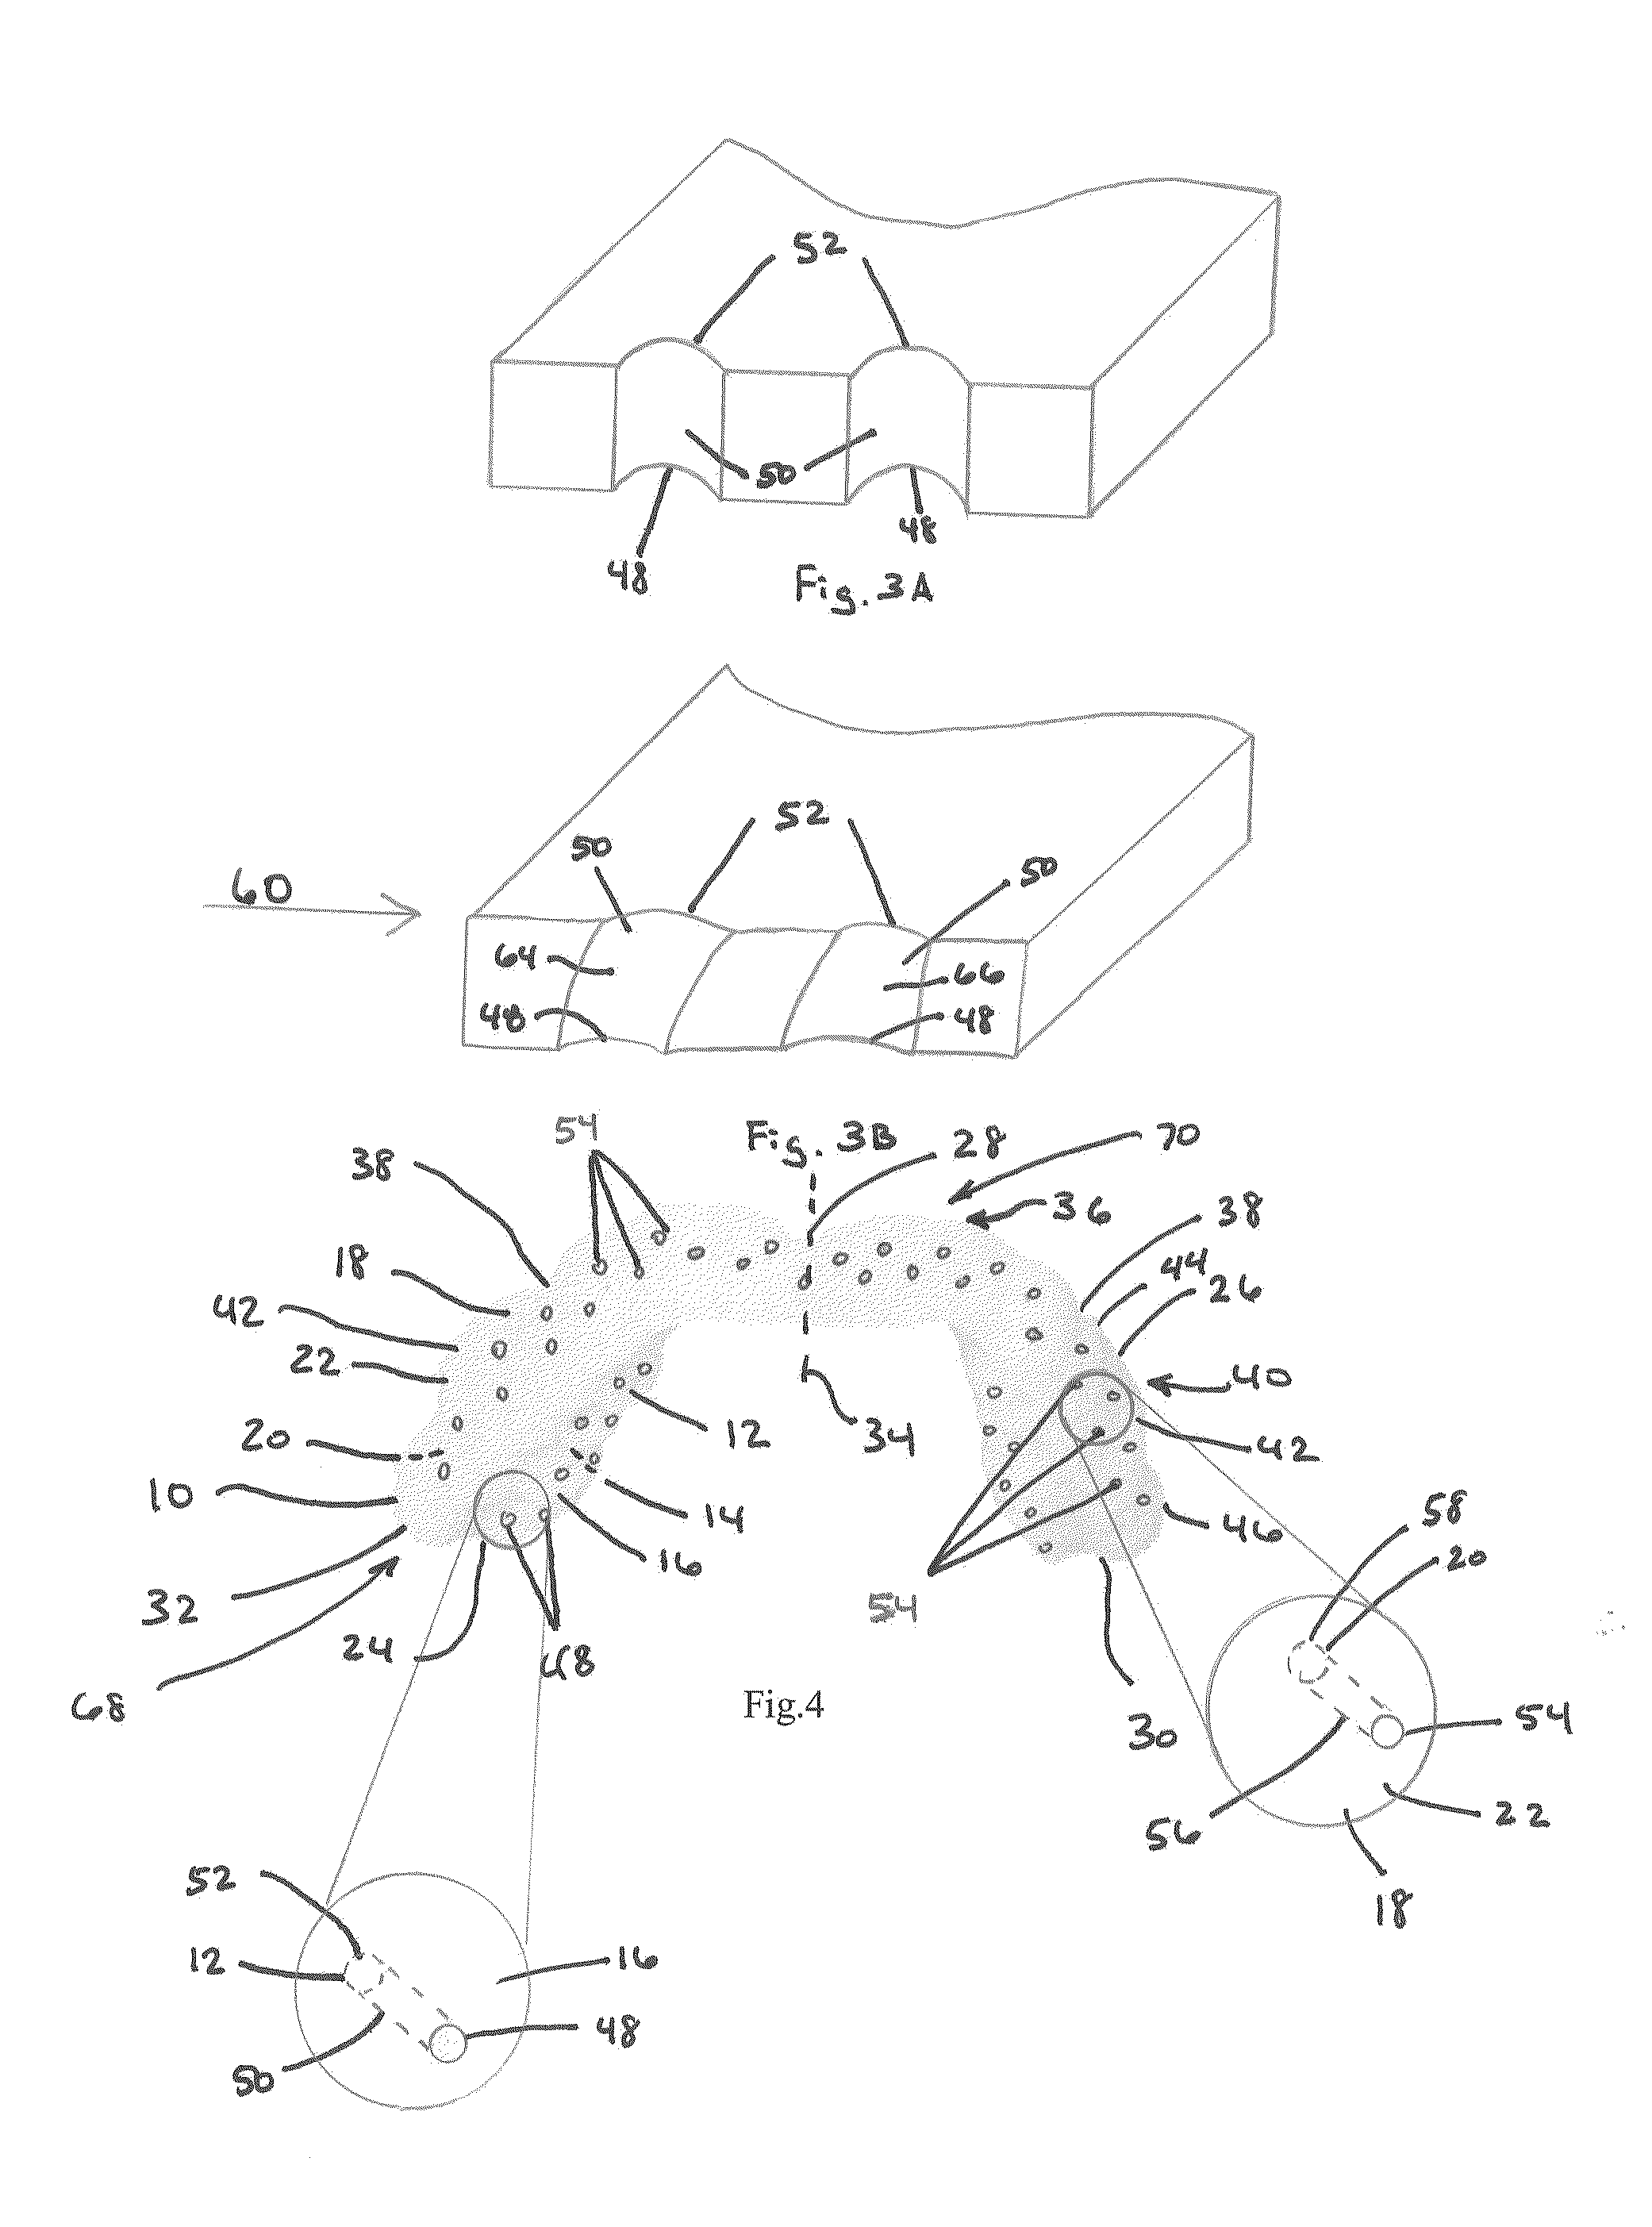 Custom-Formable Night Grinding Appliance and Method of Use